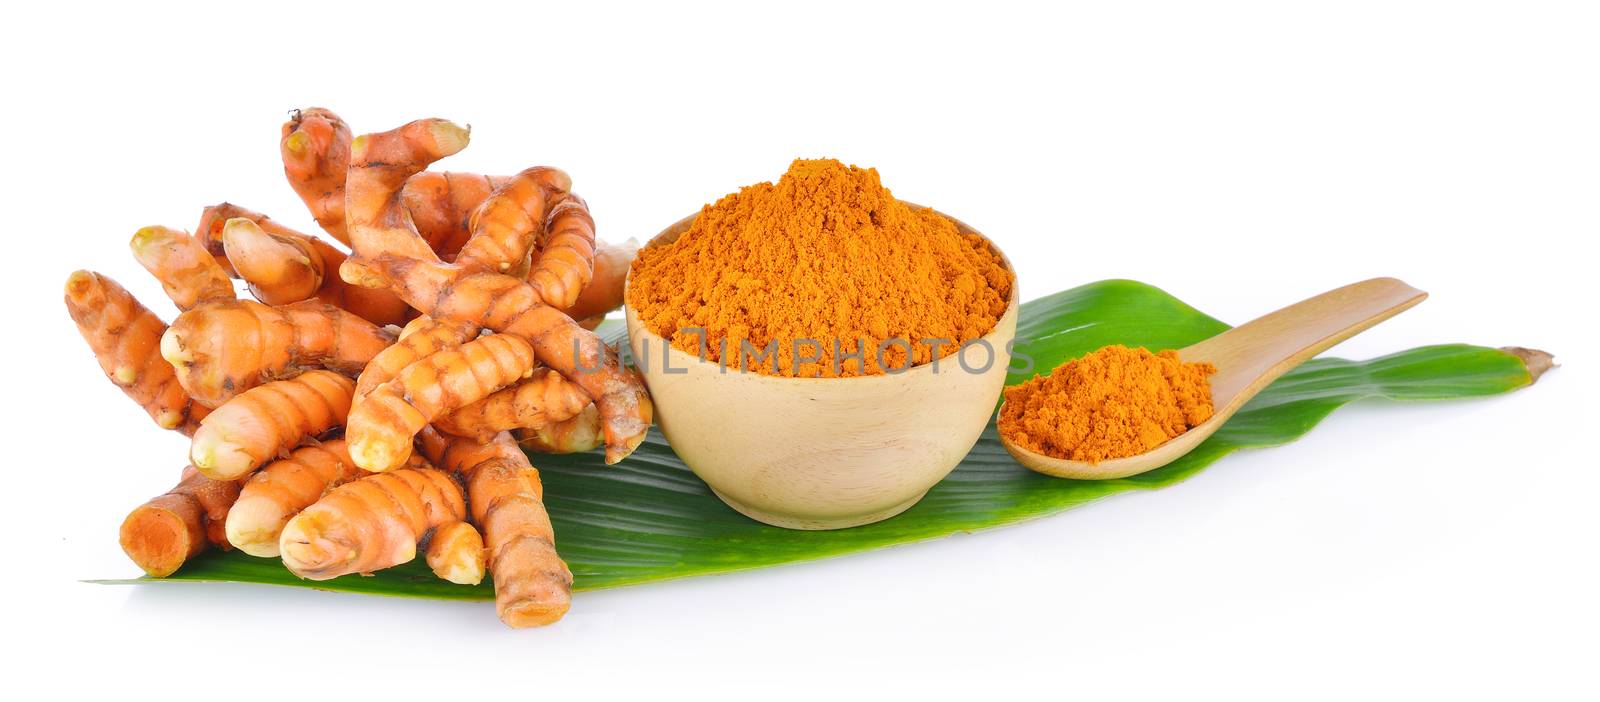 turmeric root and dry tumeric in wood bowl on white background